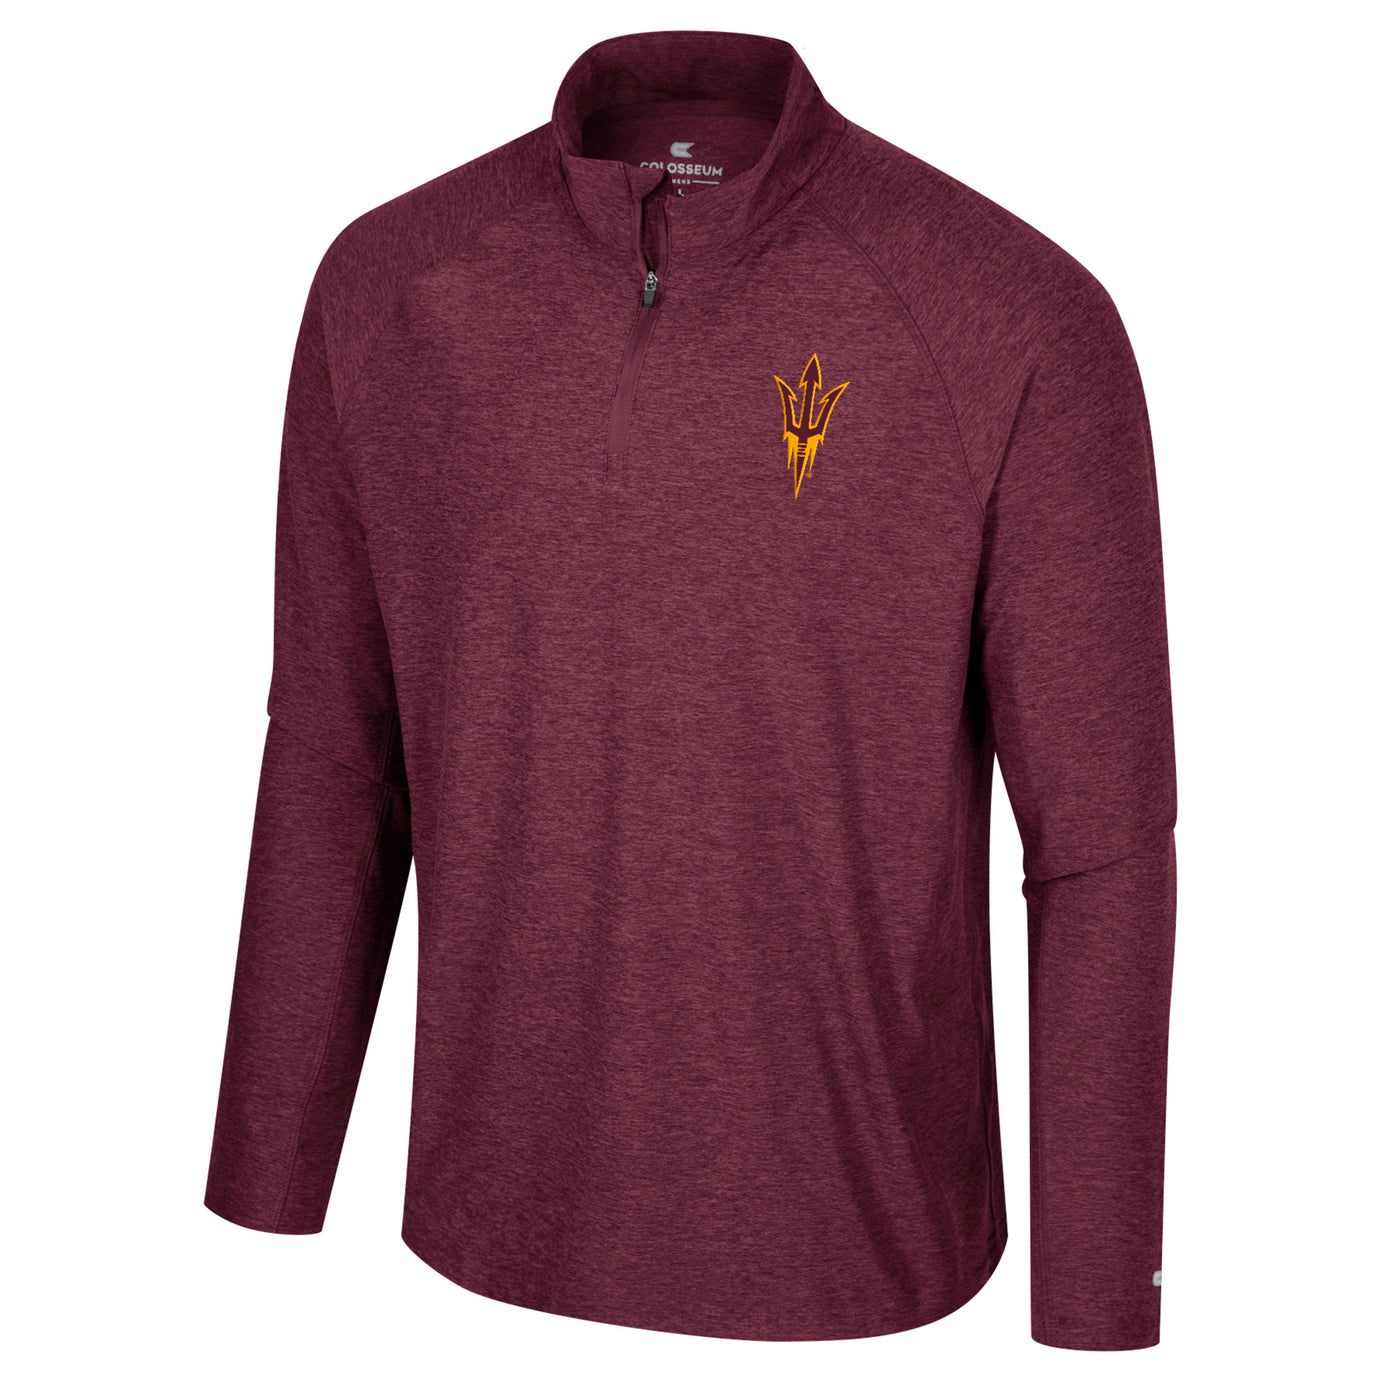 ASU maroon 1/4 zip with small gold outline of a pitchfork on one side of the chest.